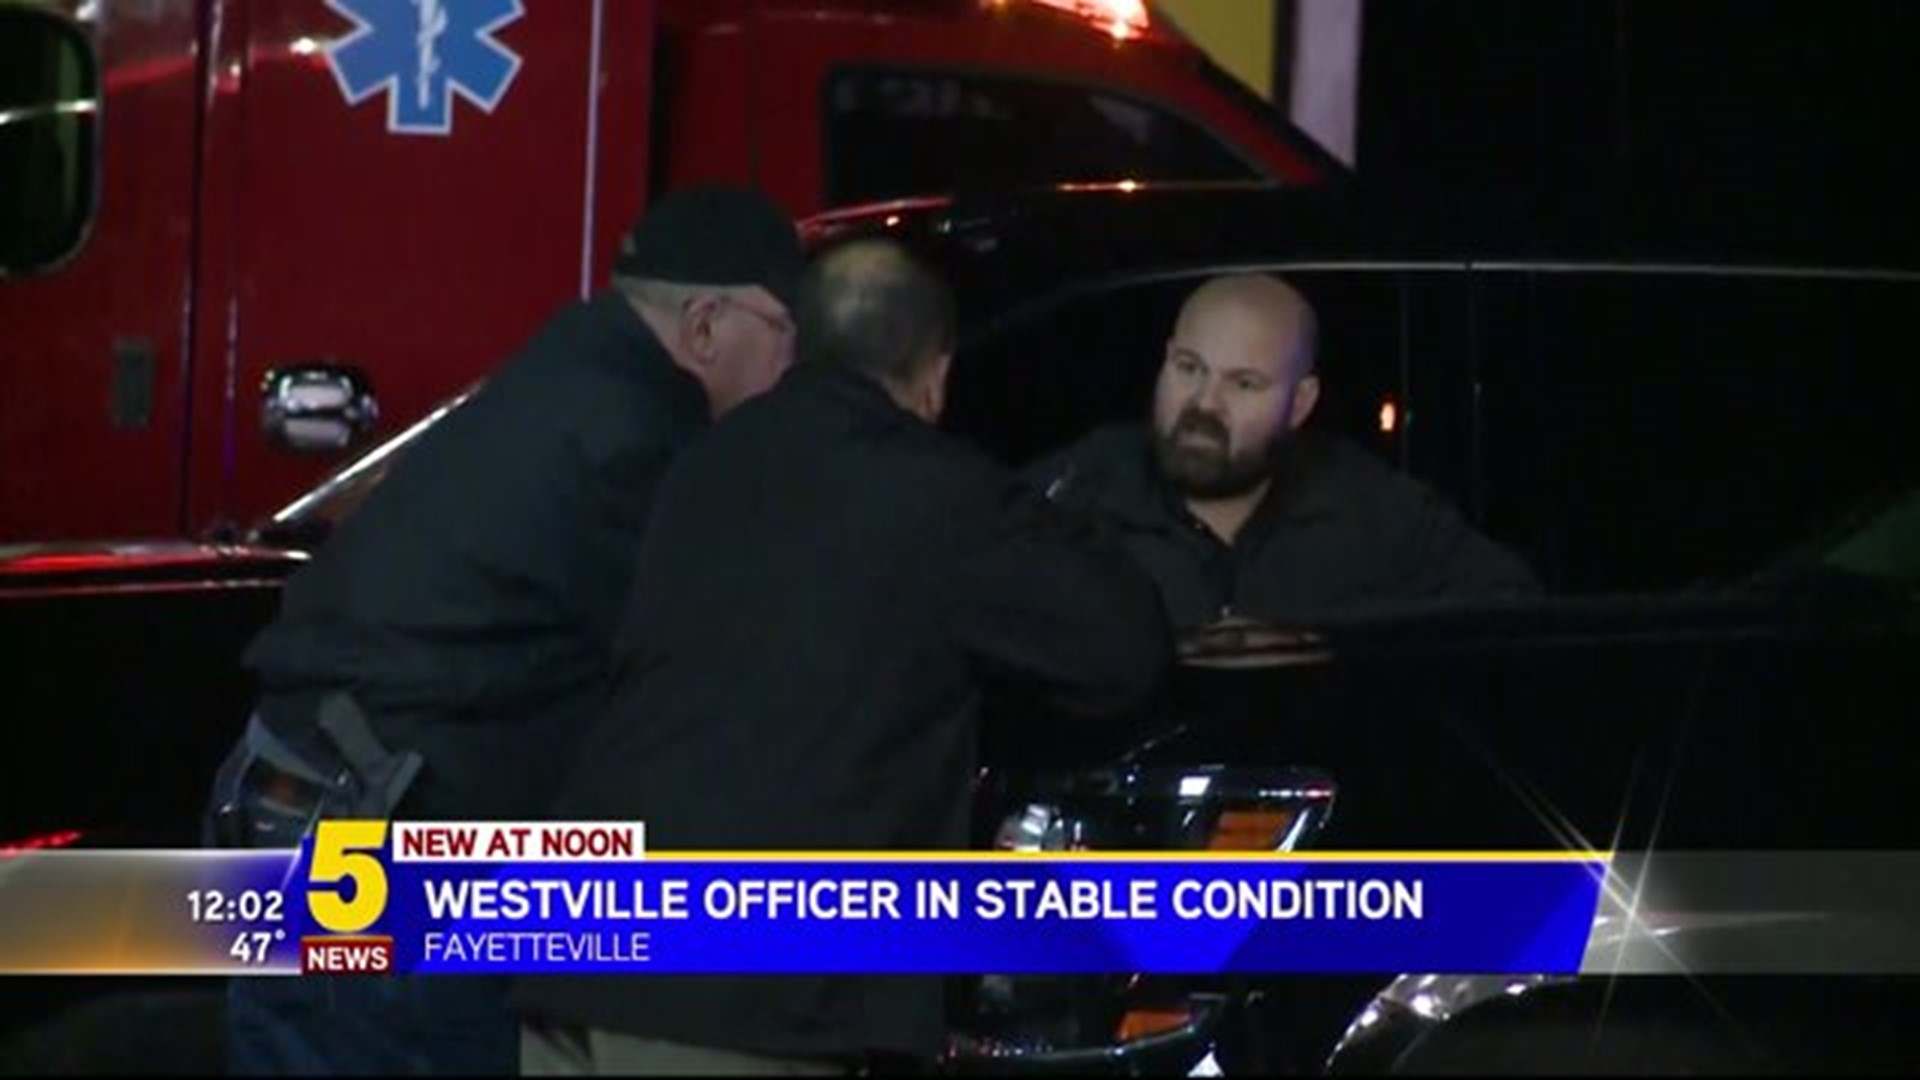 POLICE OFFICER IN STABLE CONDITION NOW